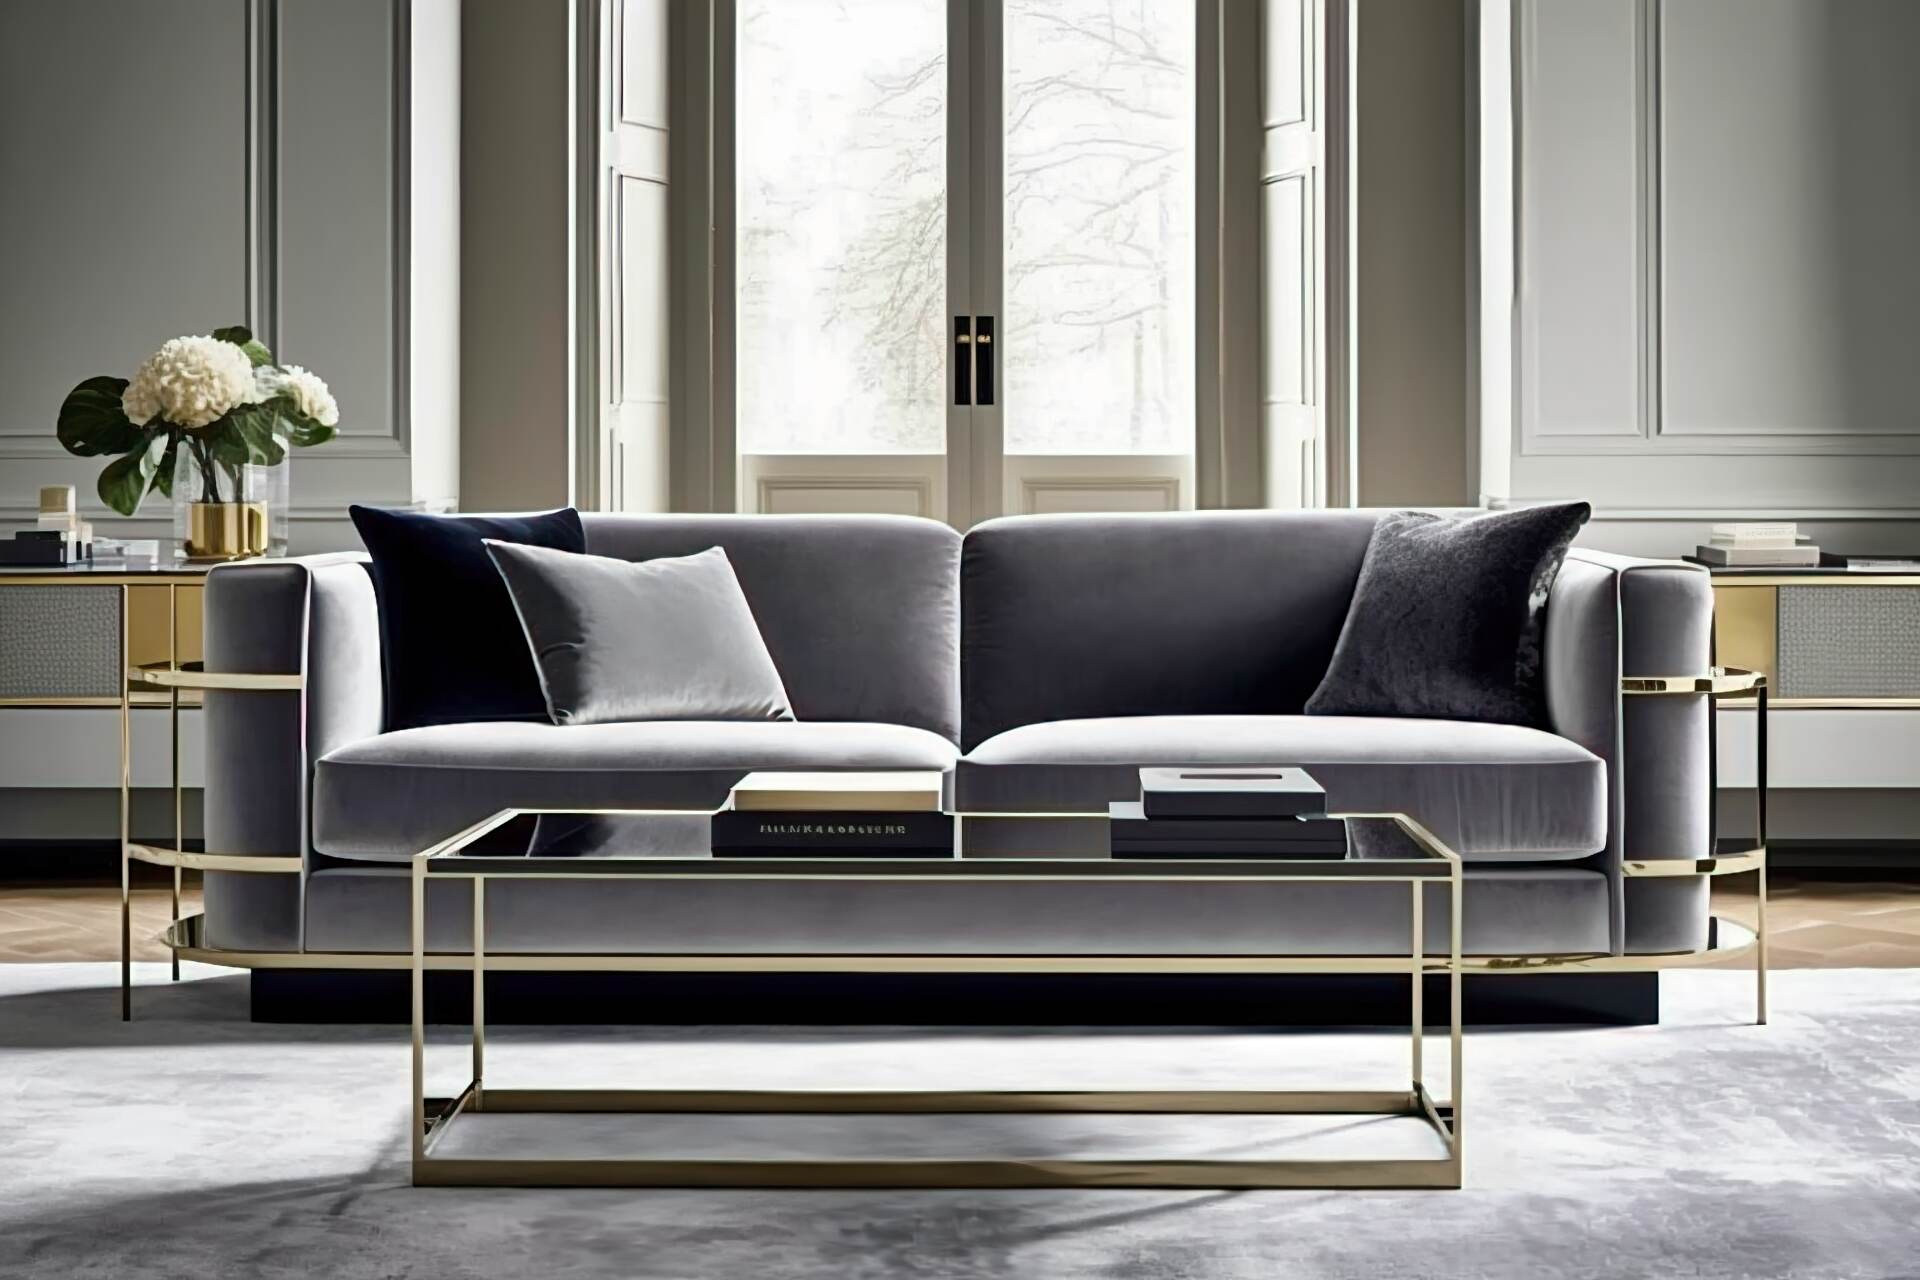 A Contemporary Italian Sofa With Clean Lines And A Sleek